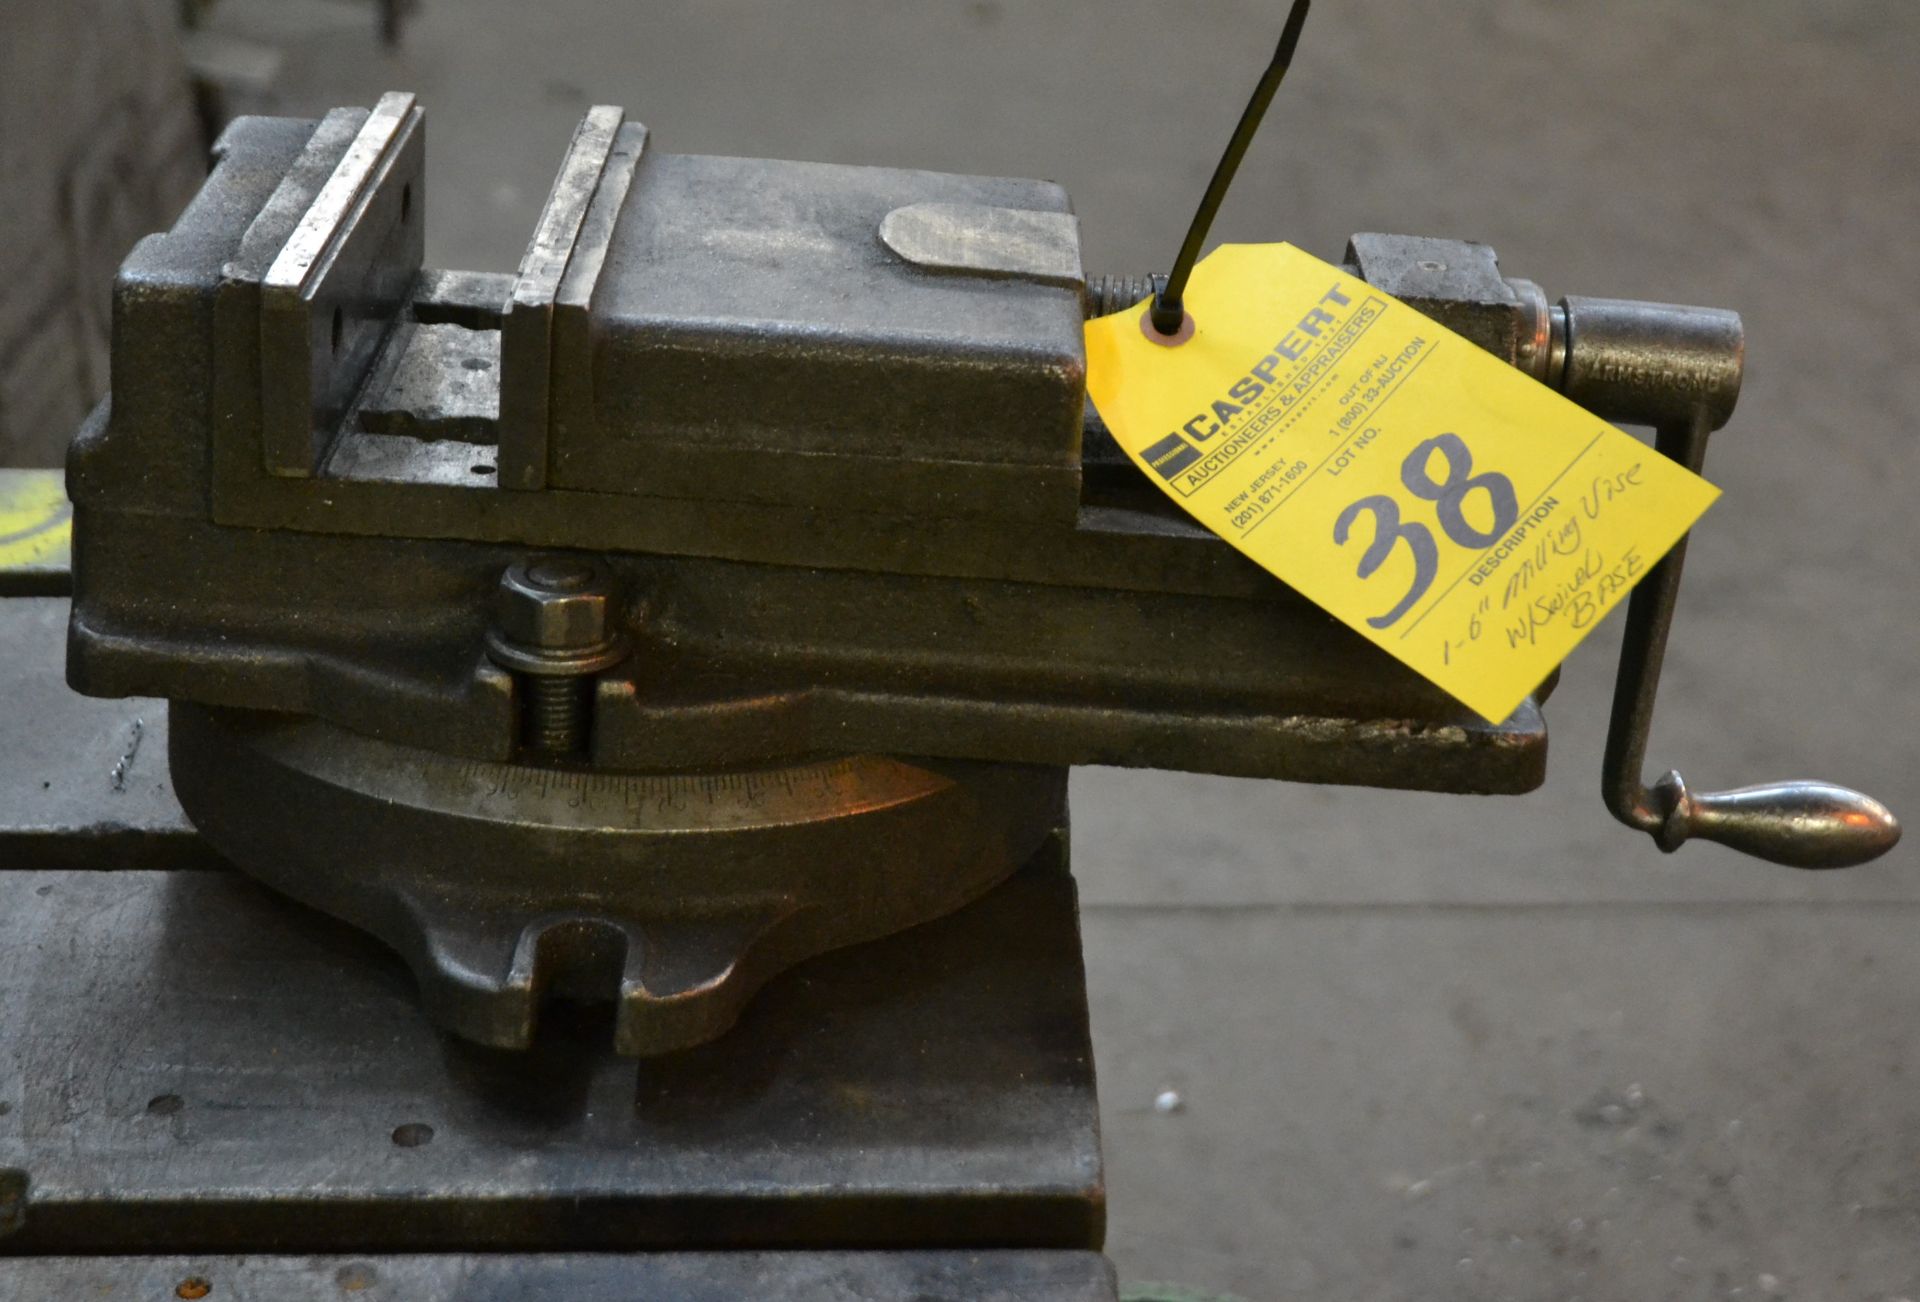 6" Milling Vise with Swivel Base